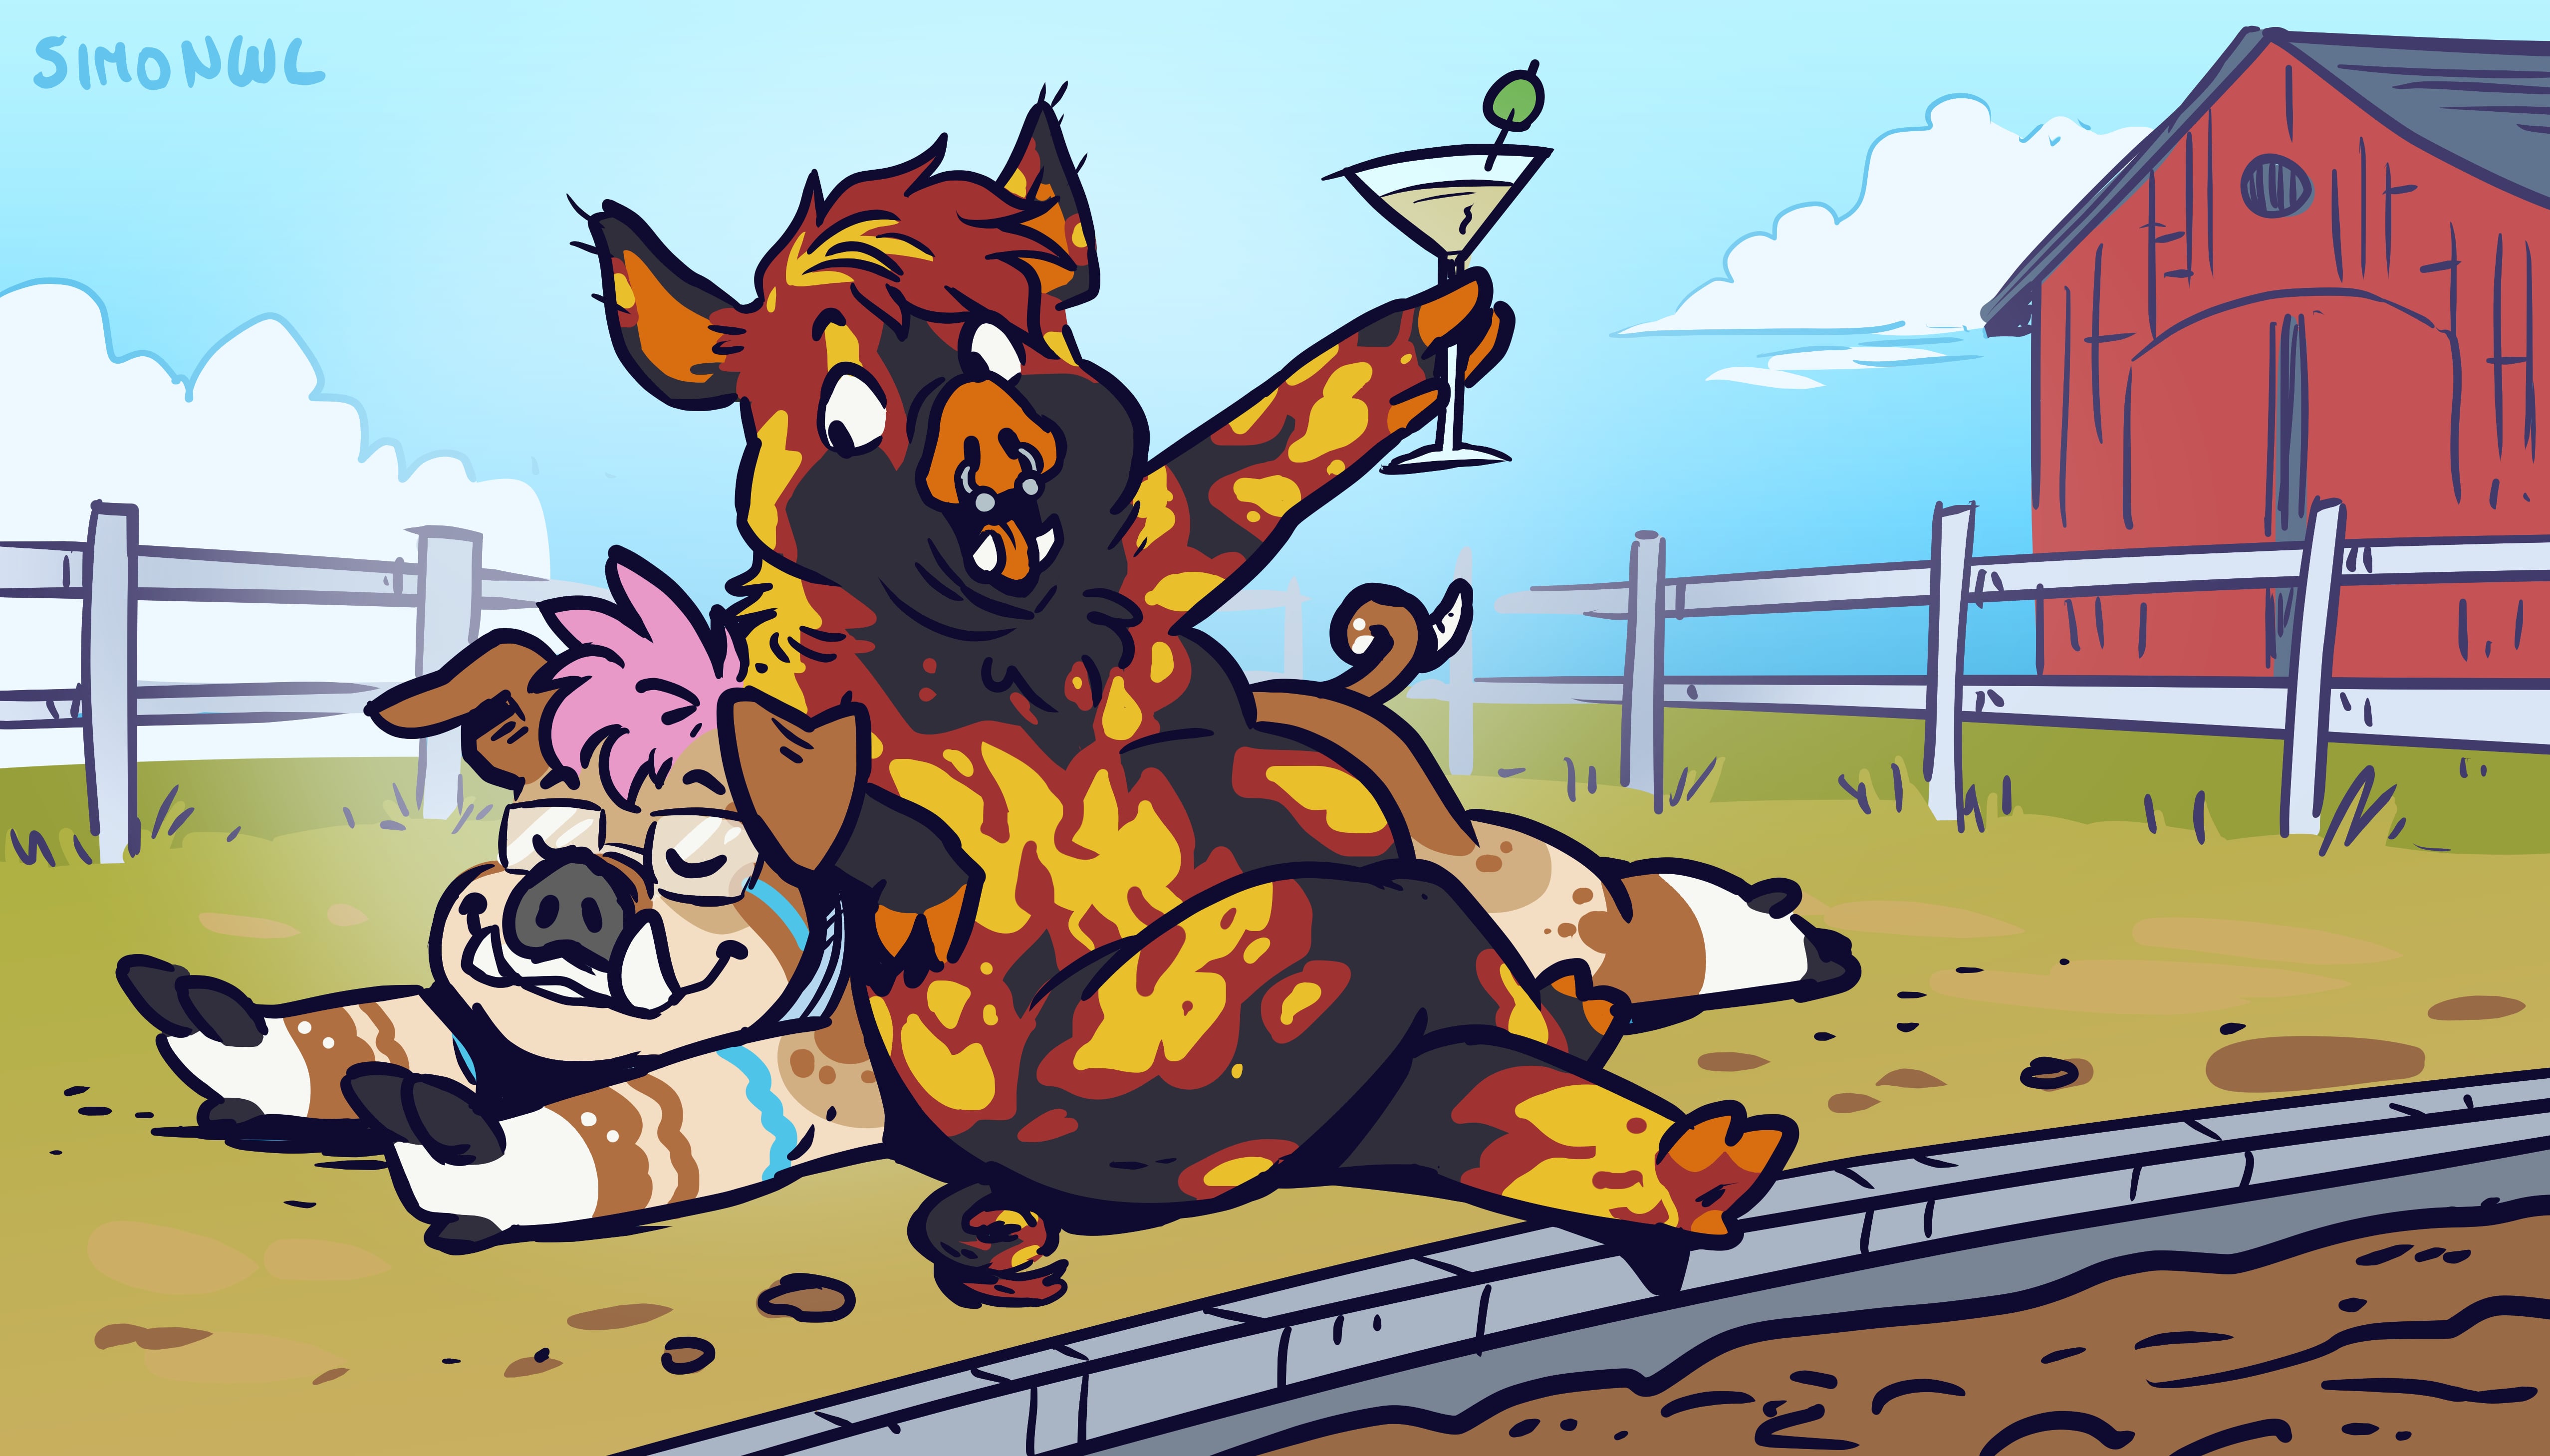 Bowie and LuciFur as hogs for Hogust, lounging by a pool of mud with a barn in the background